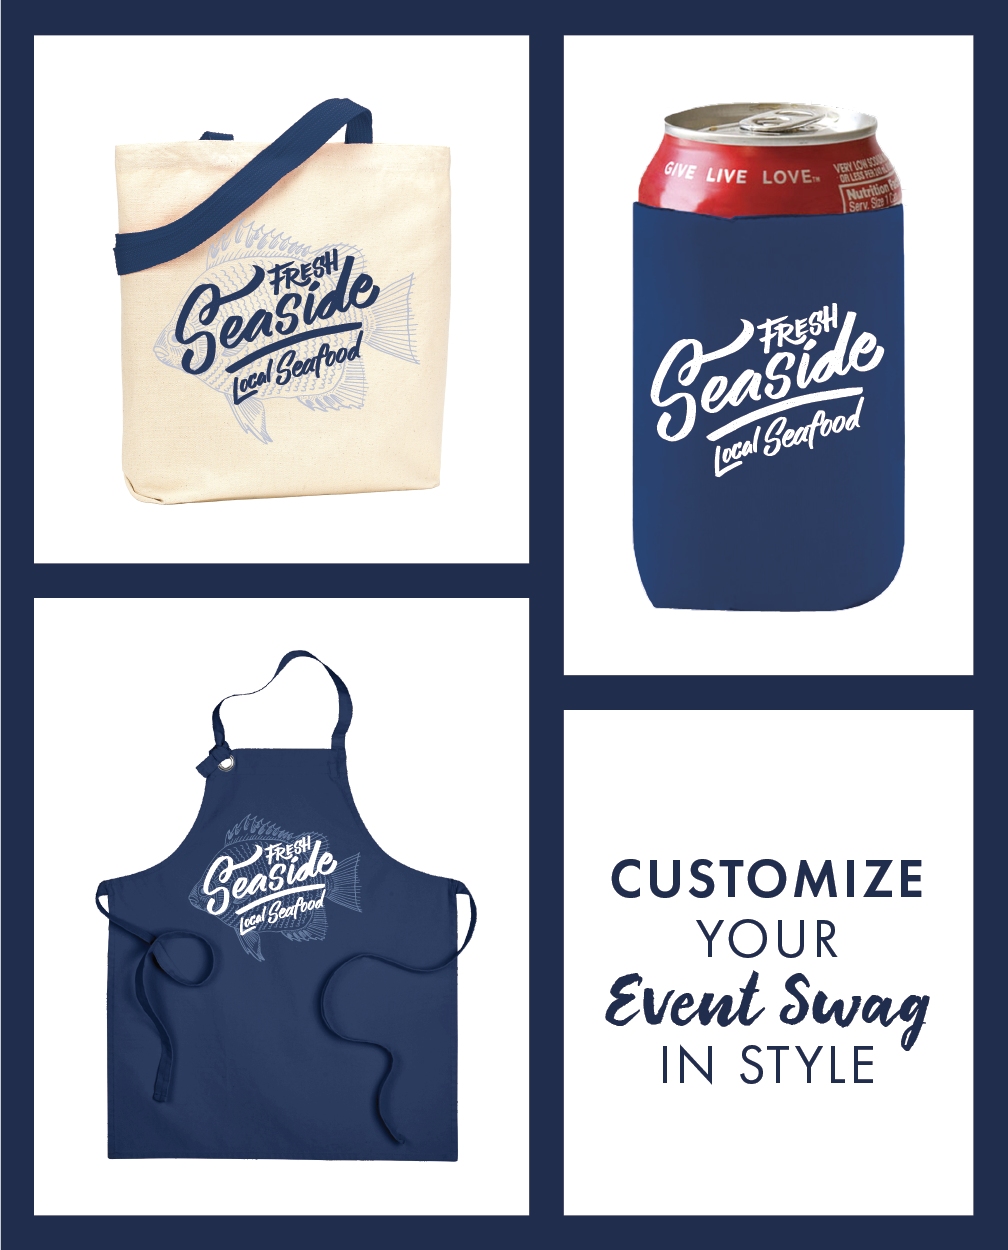 Custom bags, aprons & coozies? Big Frog has it all!